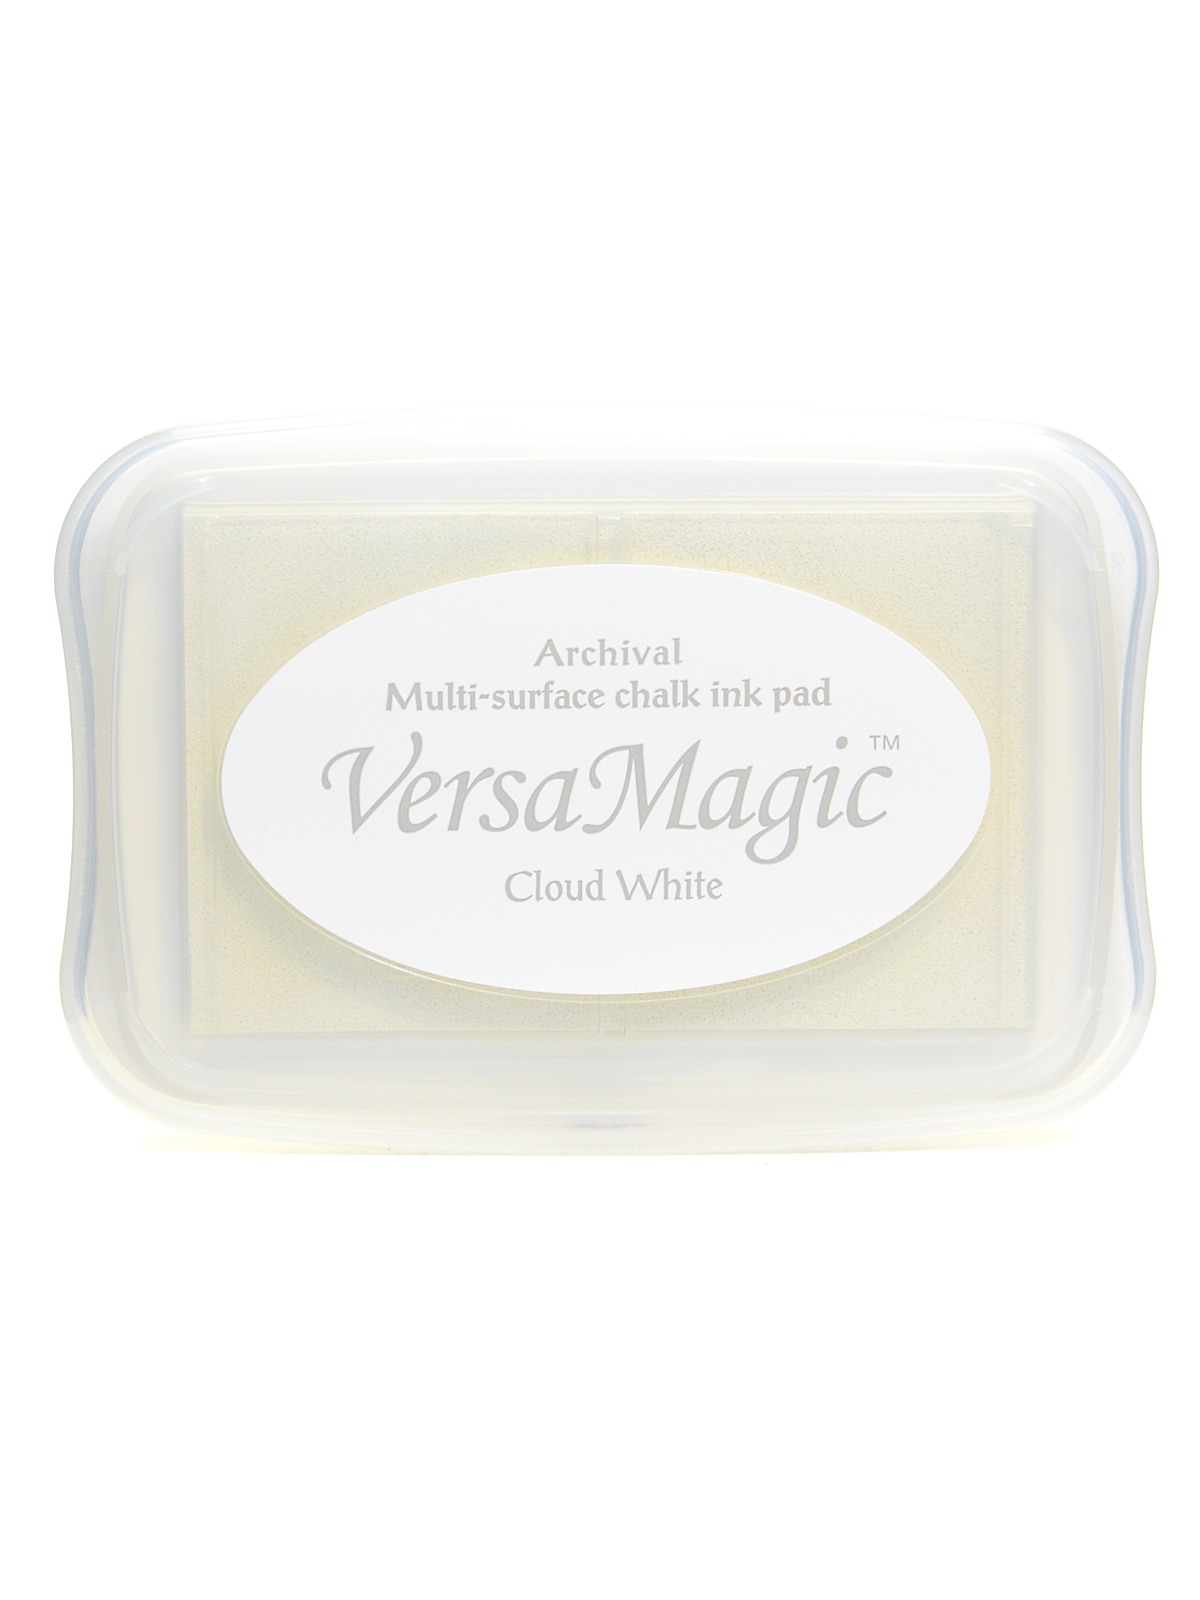 Versamagic Archival Multi-surface Chalk Ink Cloud White 3.75 In. X 2.625 In. Pad